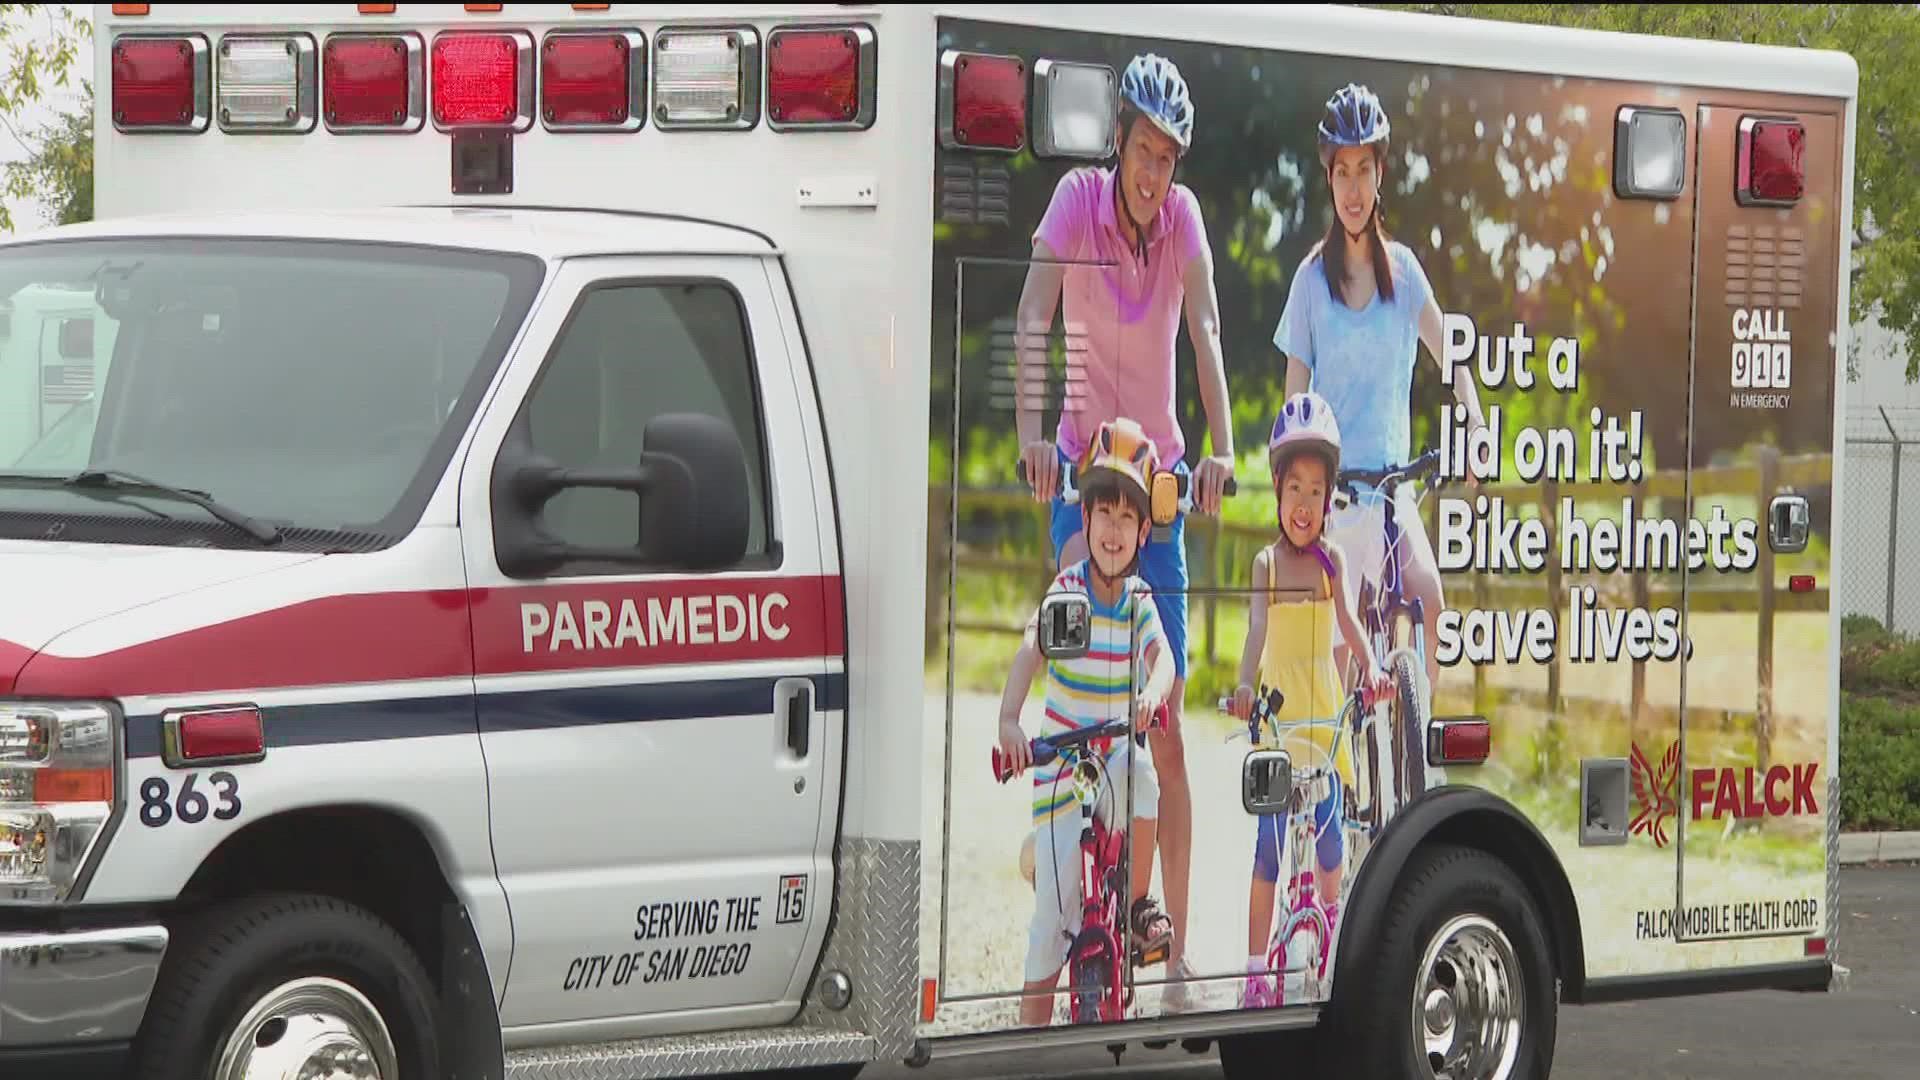 The four "Rolling Billboard Public Service Announcement (PSA) ambulances will be strategically placed around San Diego in four different zones.